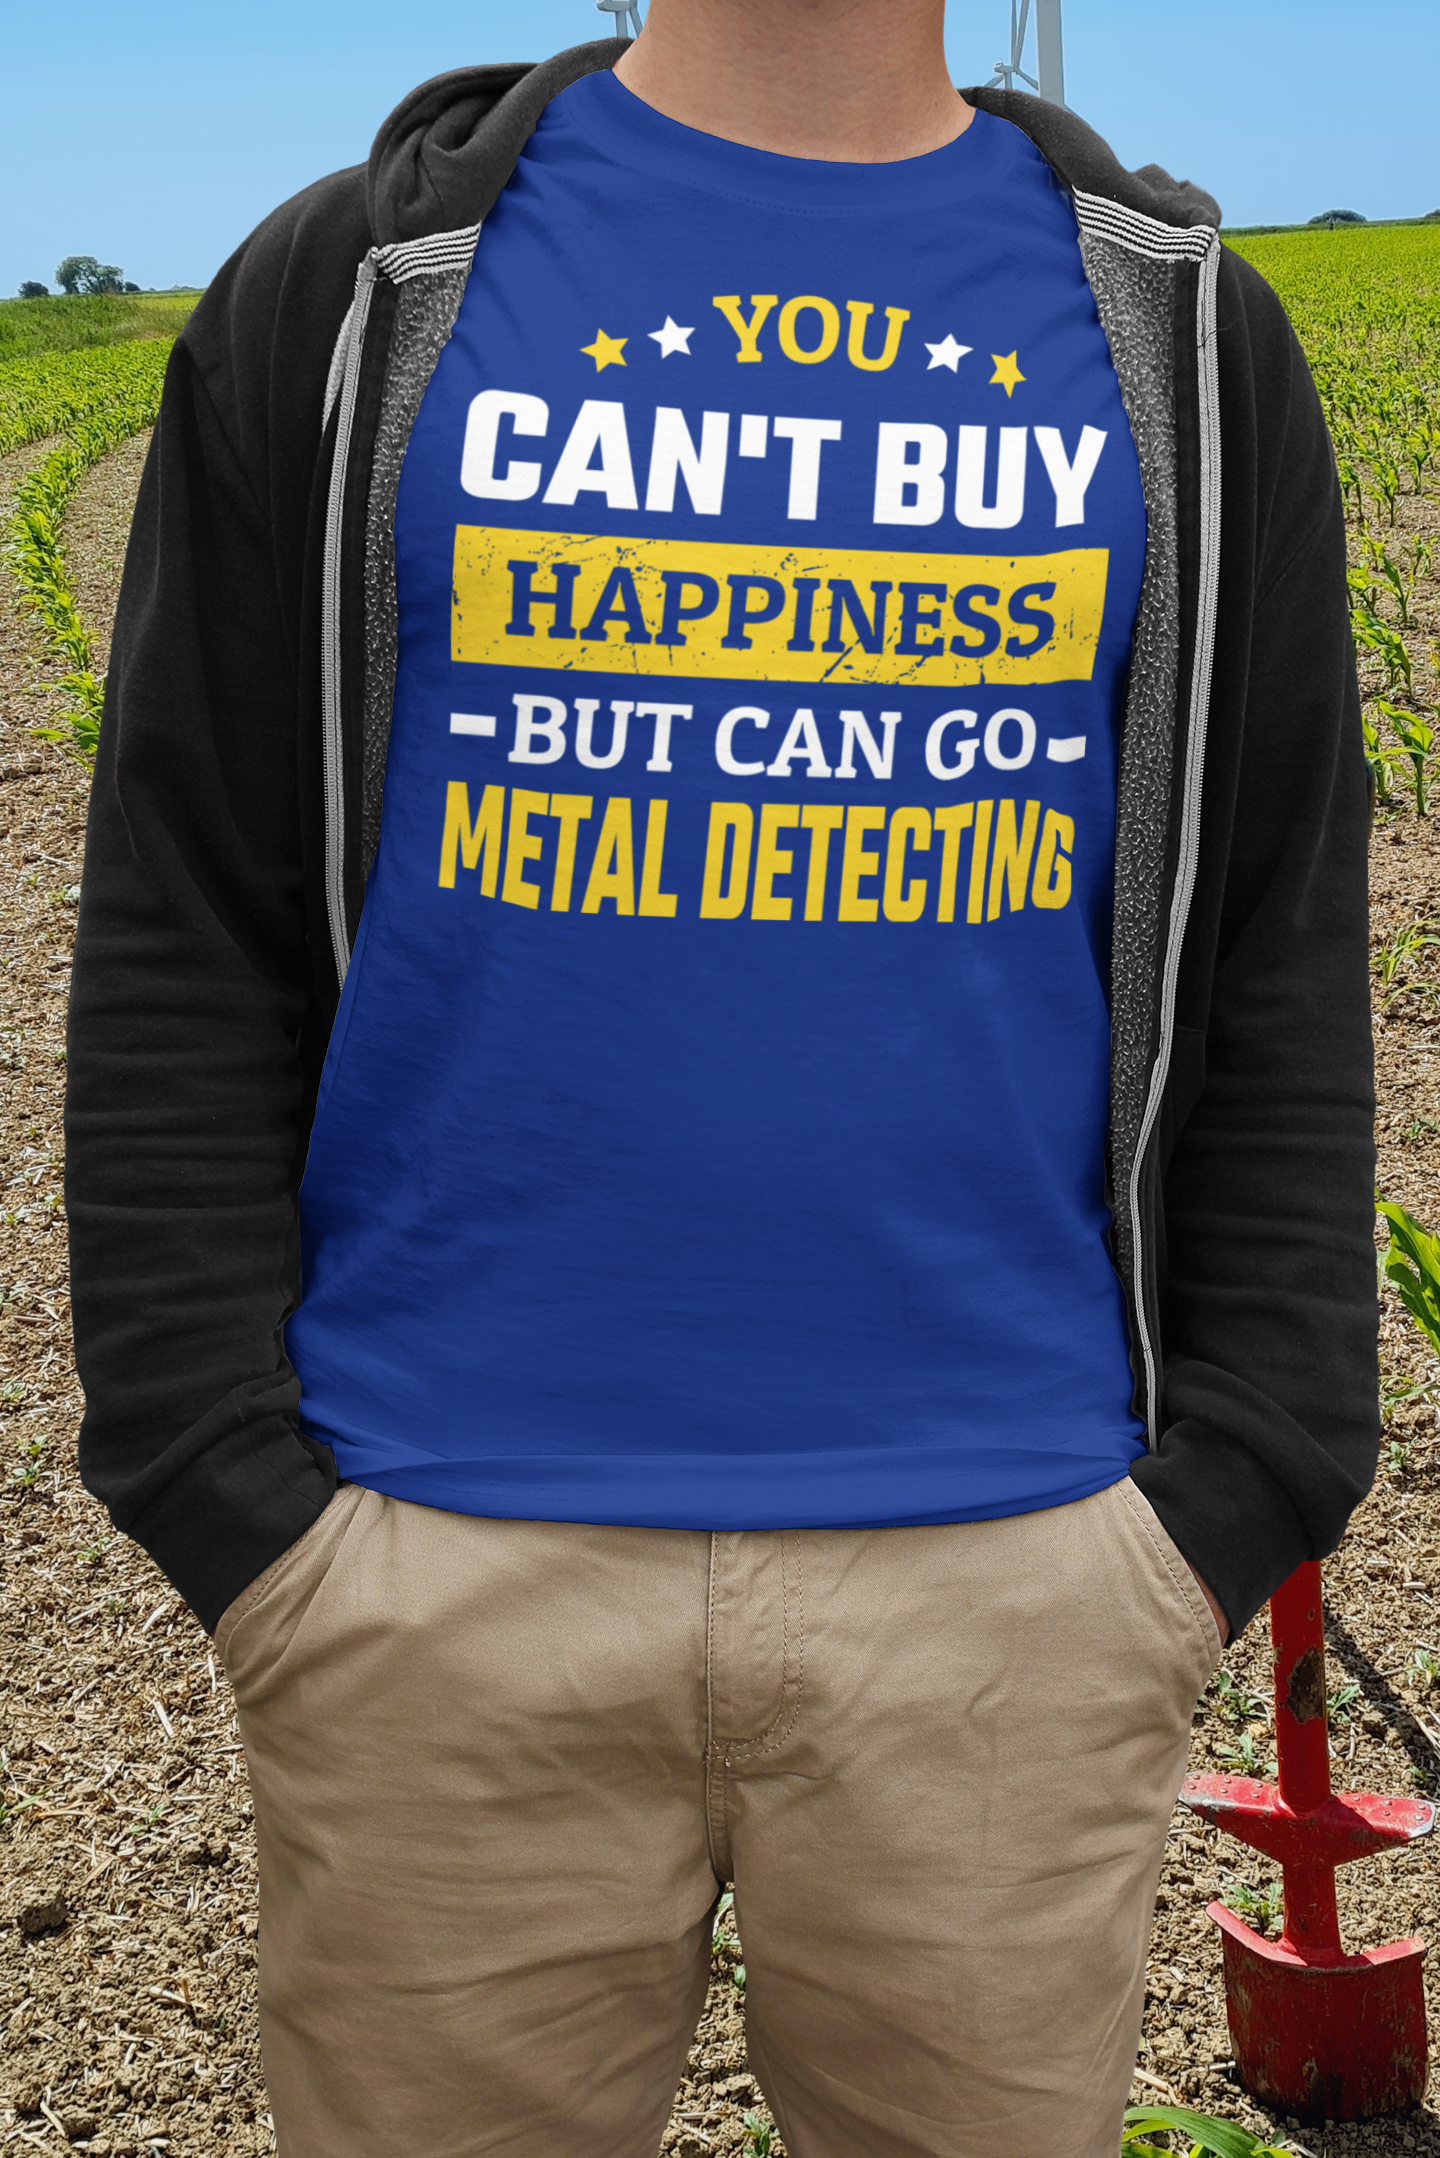 You can't buy happines but can go metal detecting